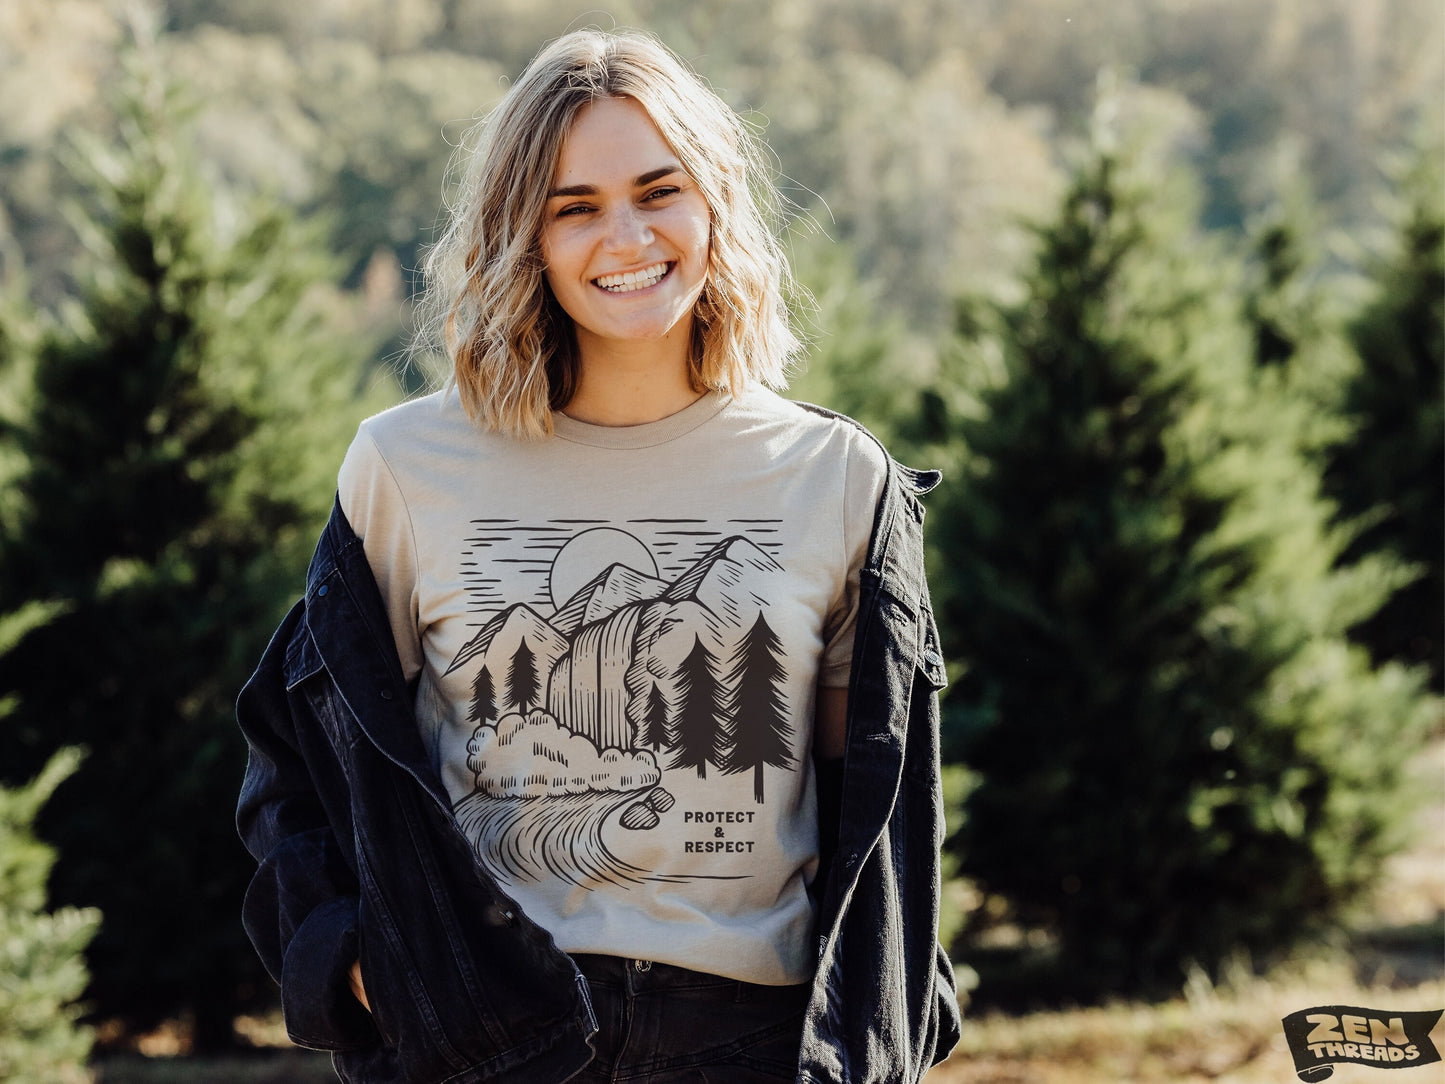 Landscape Unisex Bella Canvas national parks T Shirt eco soft printed tee mens women's adventure camping hiking nature lover trees gift